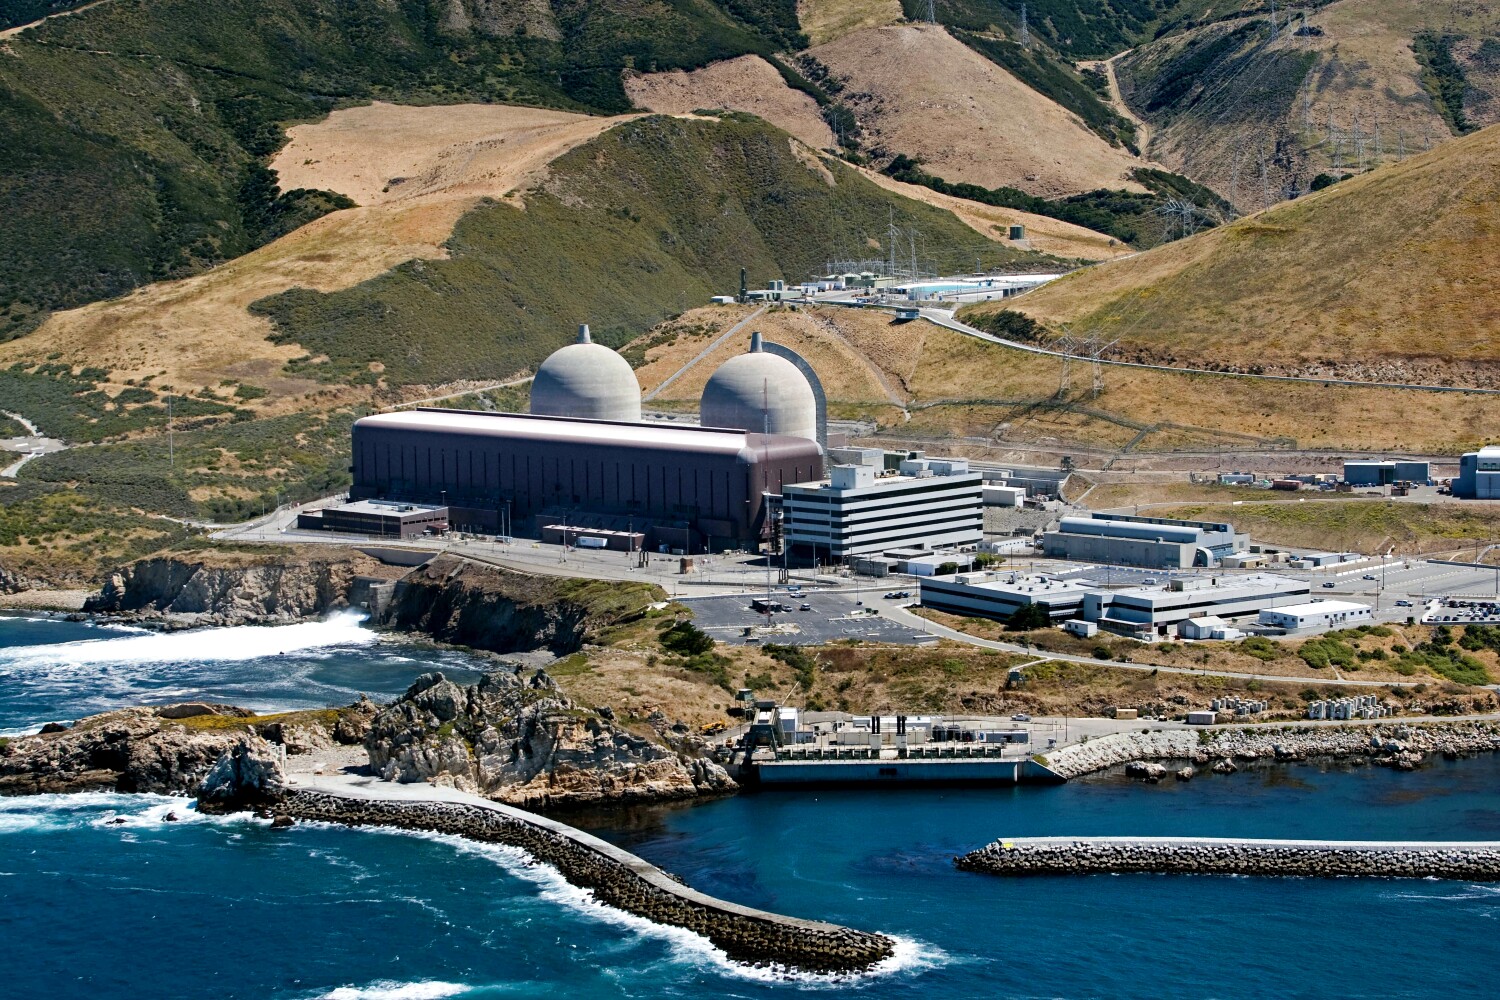 Lawmakers approve $1.4-billion loan for PG&E to keep Diablo Canyon nuclear plant open